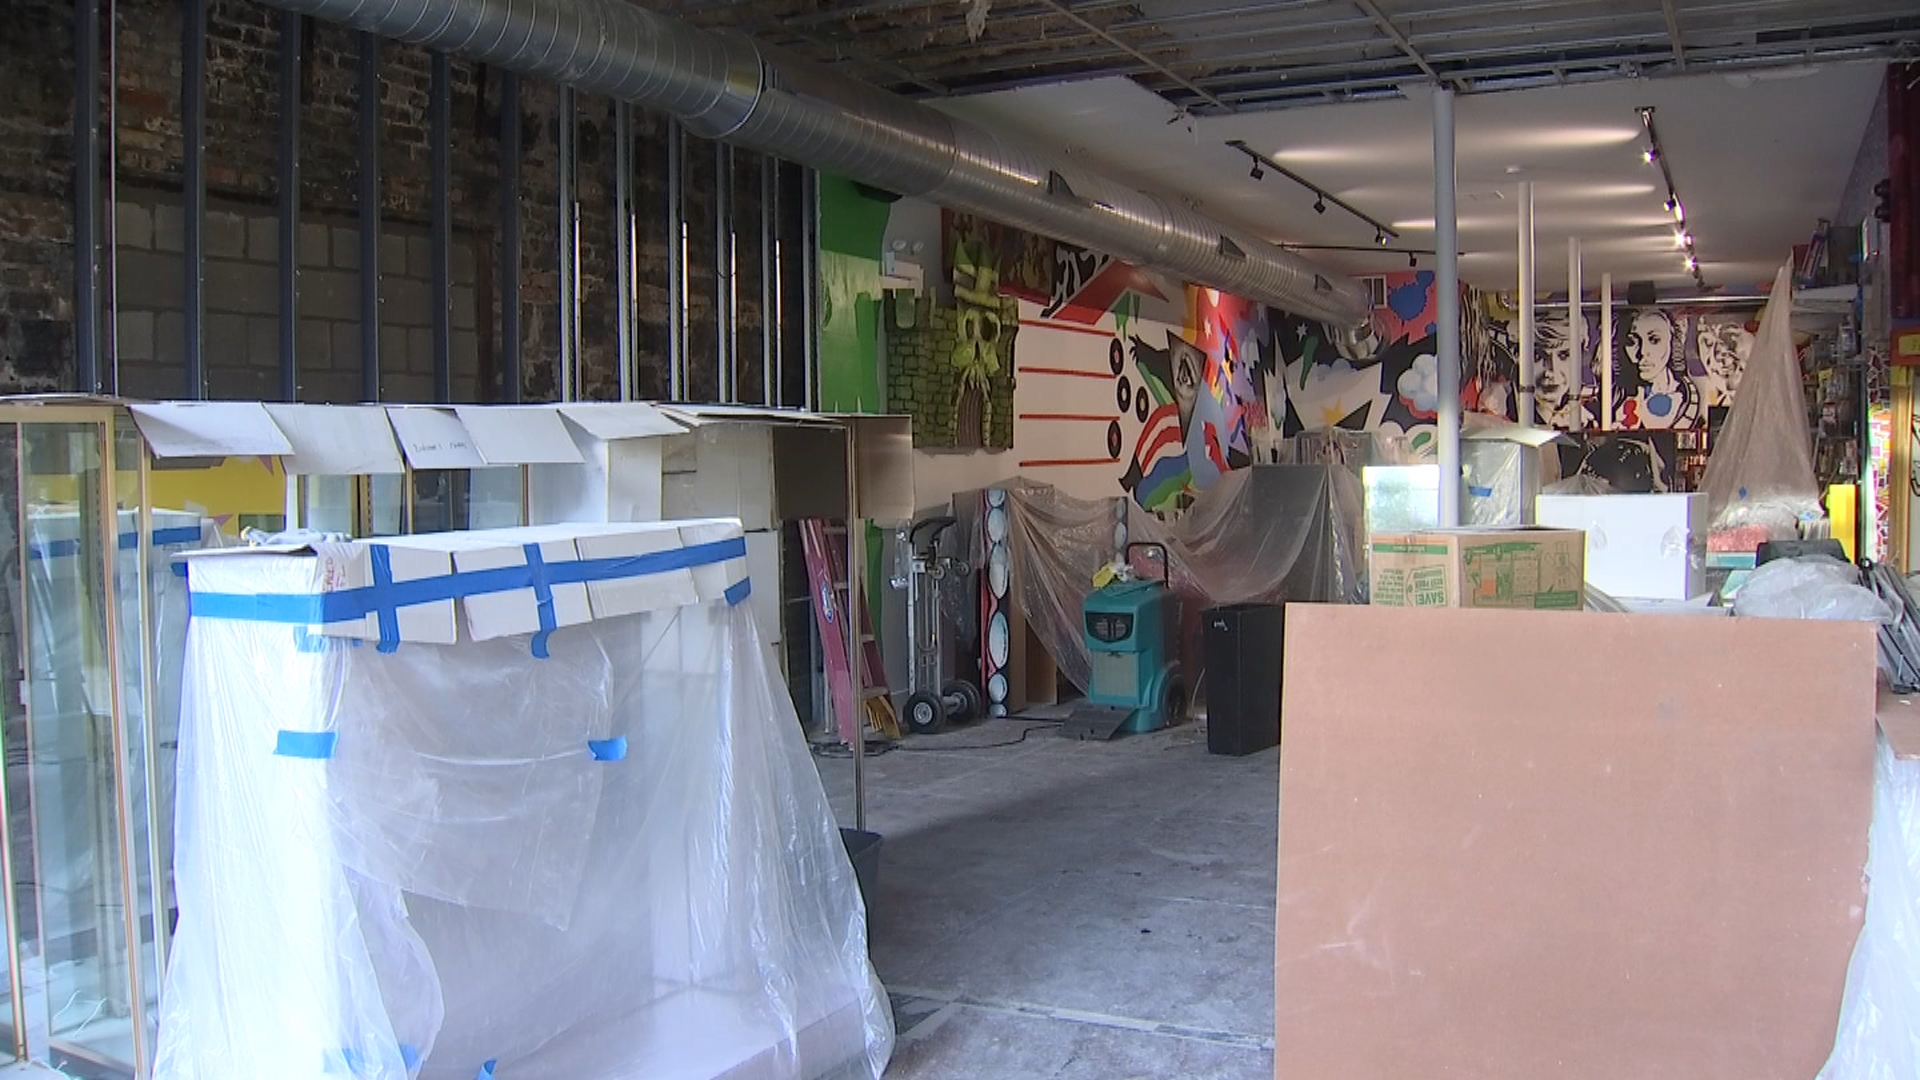 Avondale’s Bric-a-Brac Records Aims to Recover After Pipe Bursts, Flooding Business – NBC Chicago